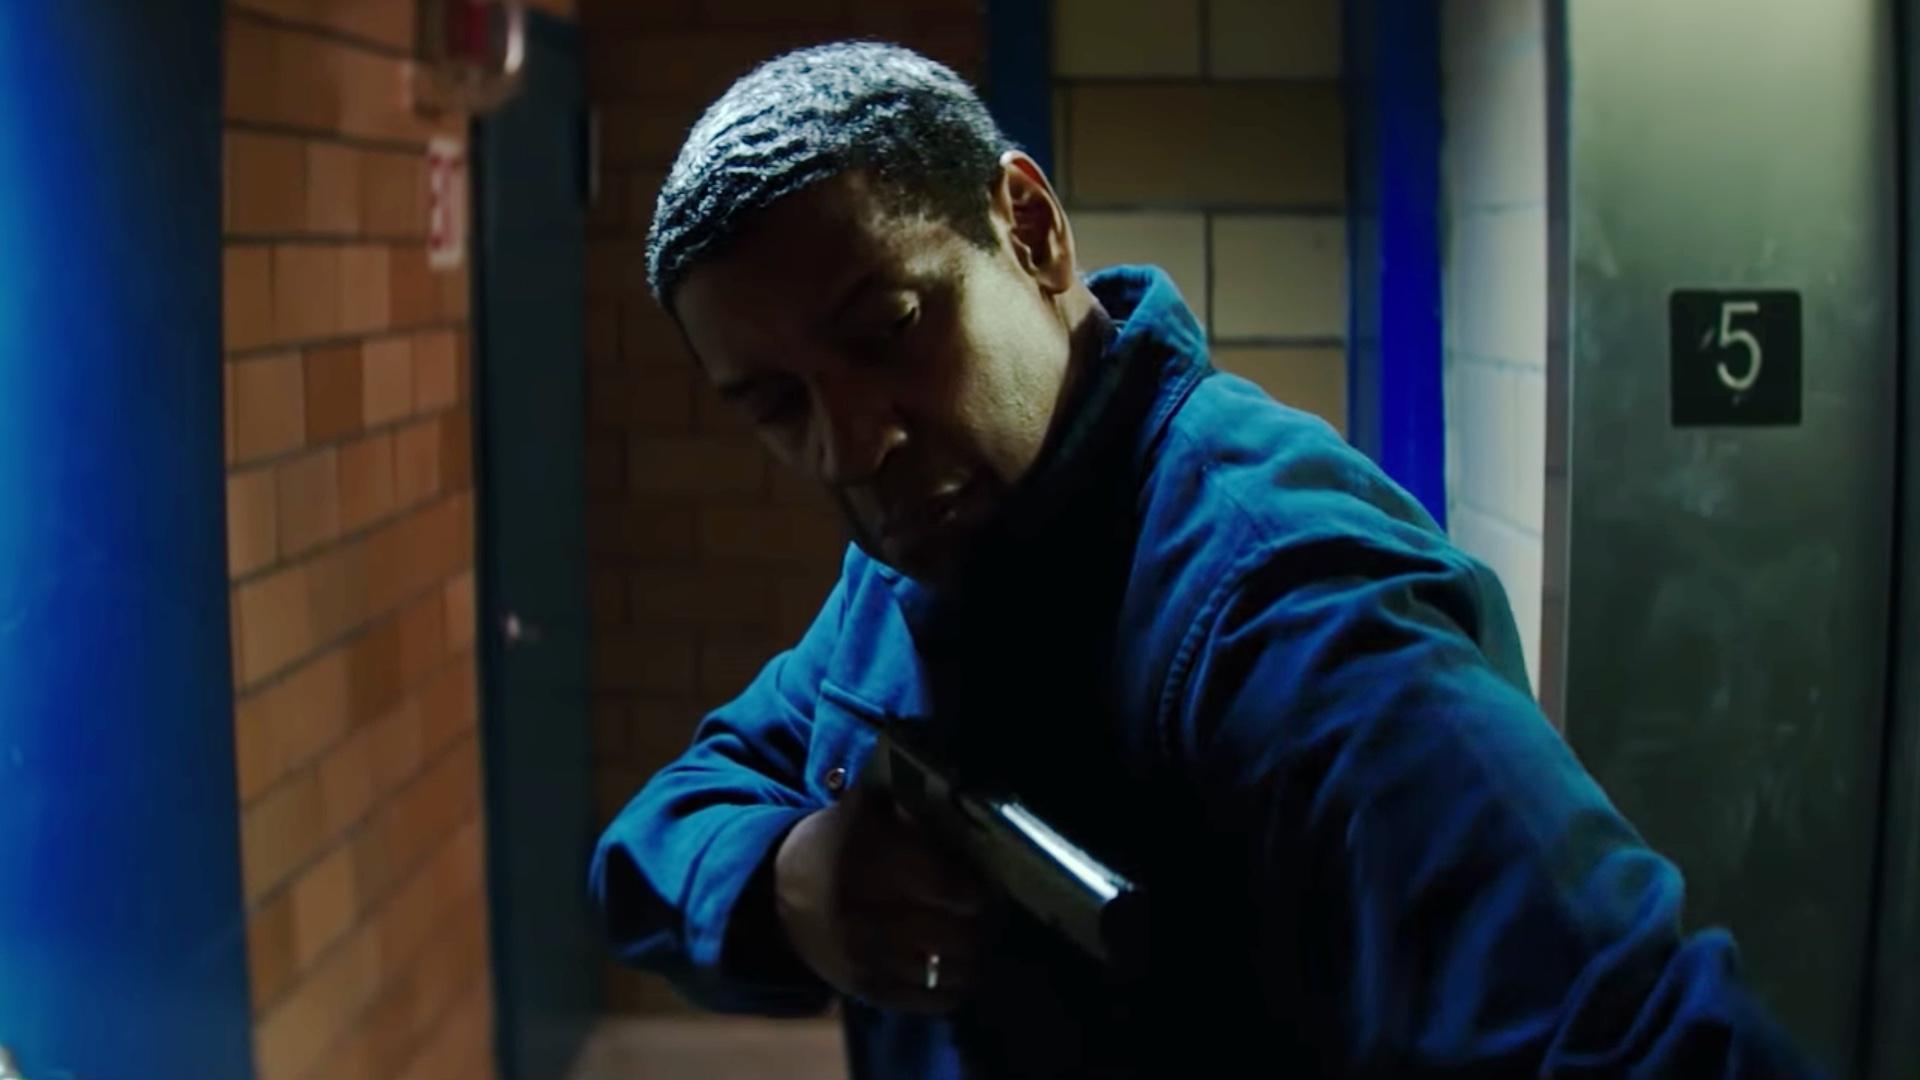 Two Clips Released For Denzel Washington's Action Film THE EQUALIZER